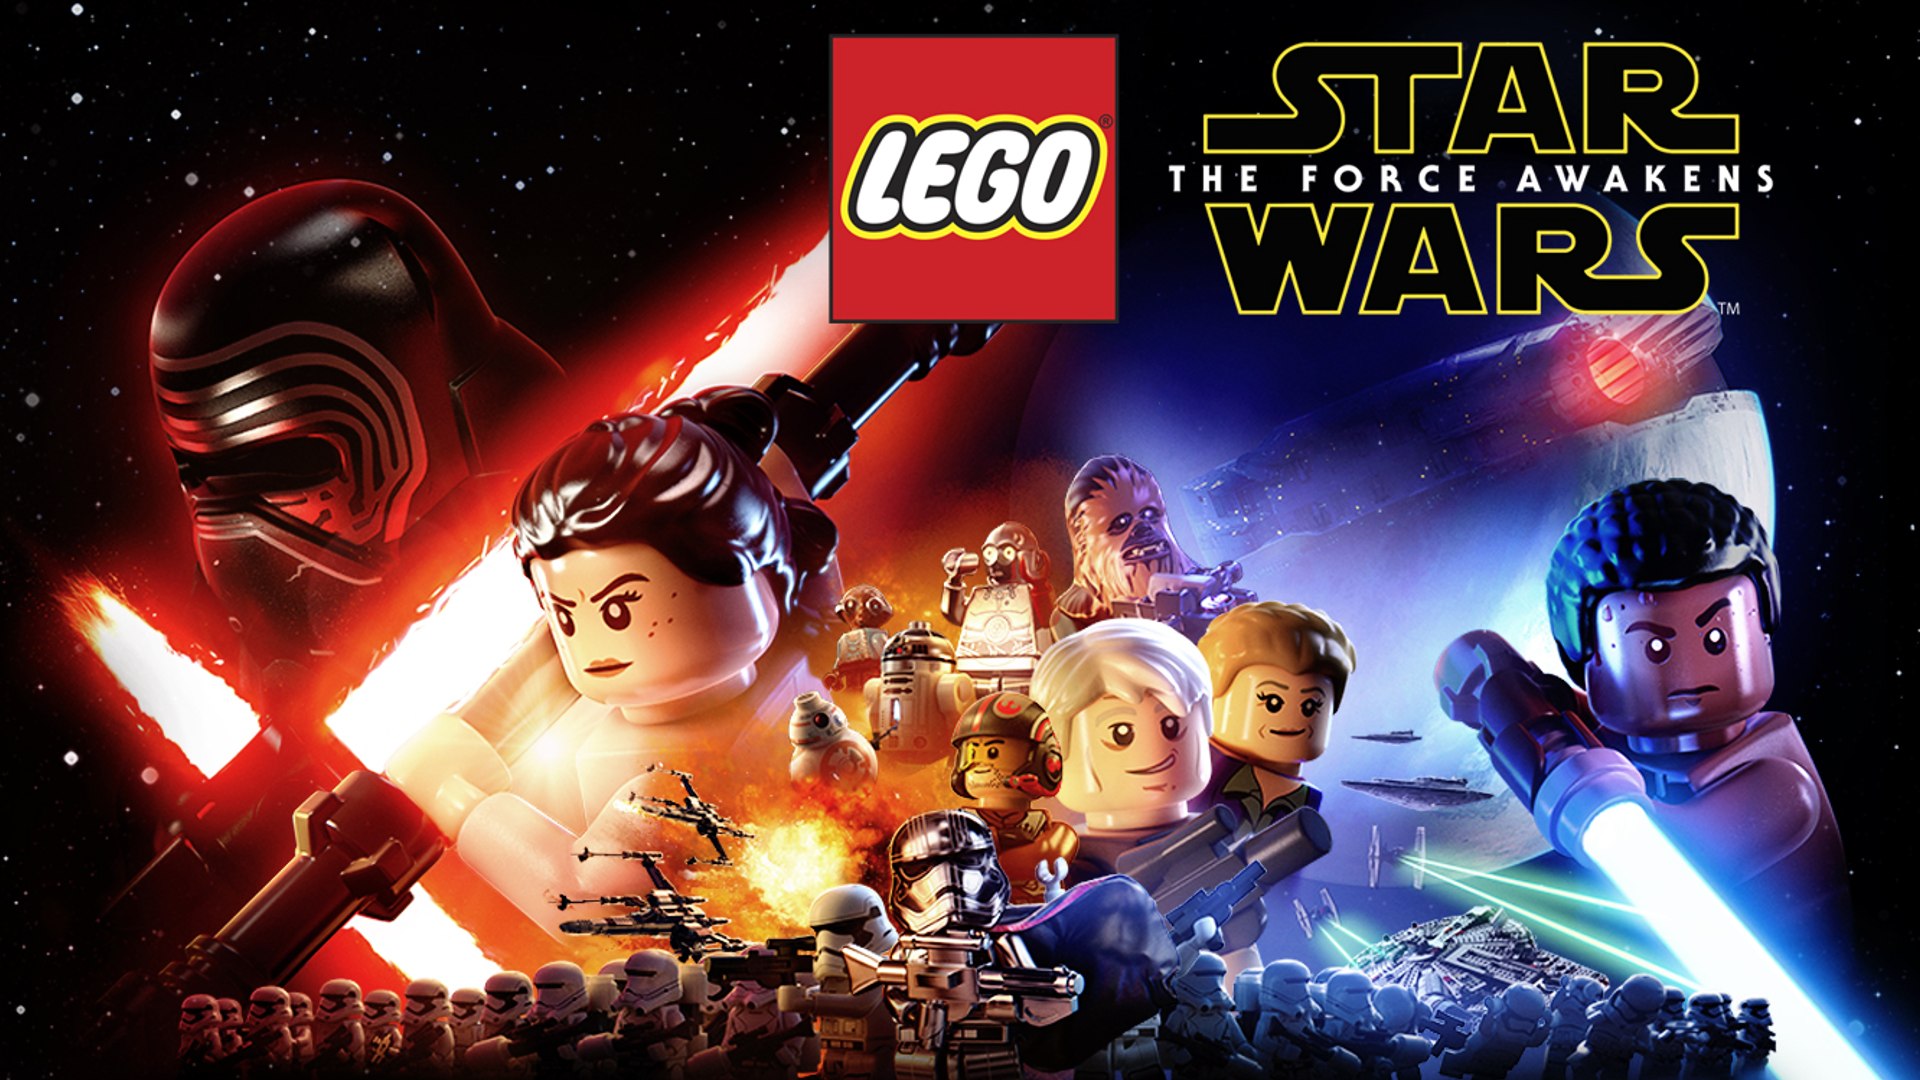 Let's Play LEGO Star Wars: The Force Awakens | LEGO Star Wars Gameplay DEMO  (Xbox One Gameplay) EN - video Dailymotion